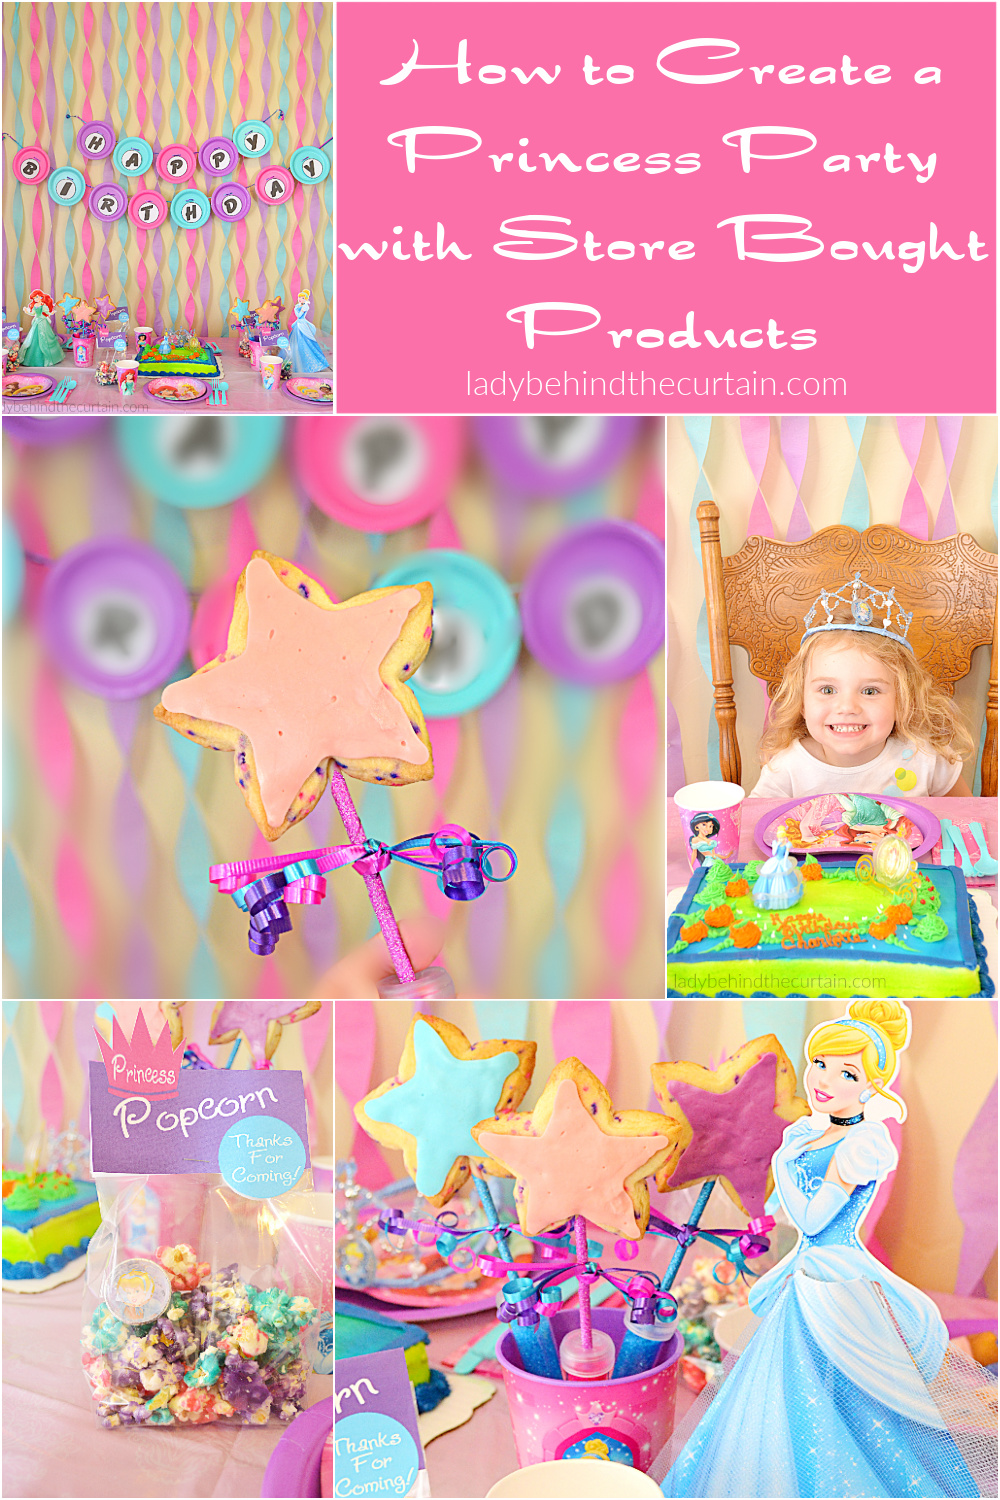 Pink & Purple Fiesta Streamer Backdrop for Enchanted Party Decorations